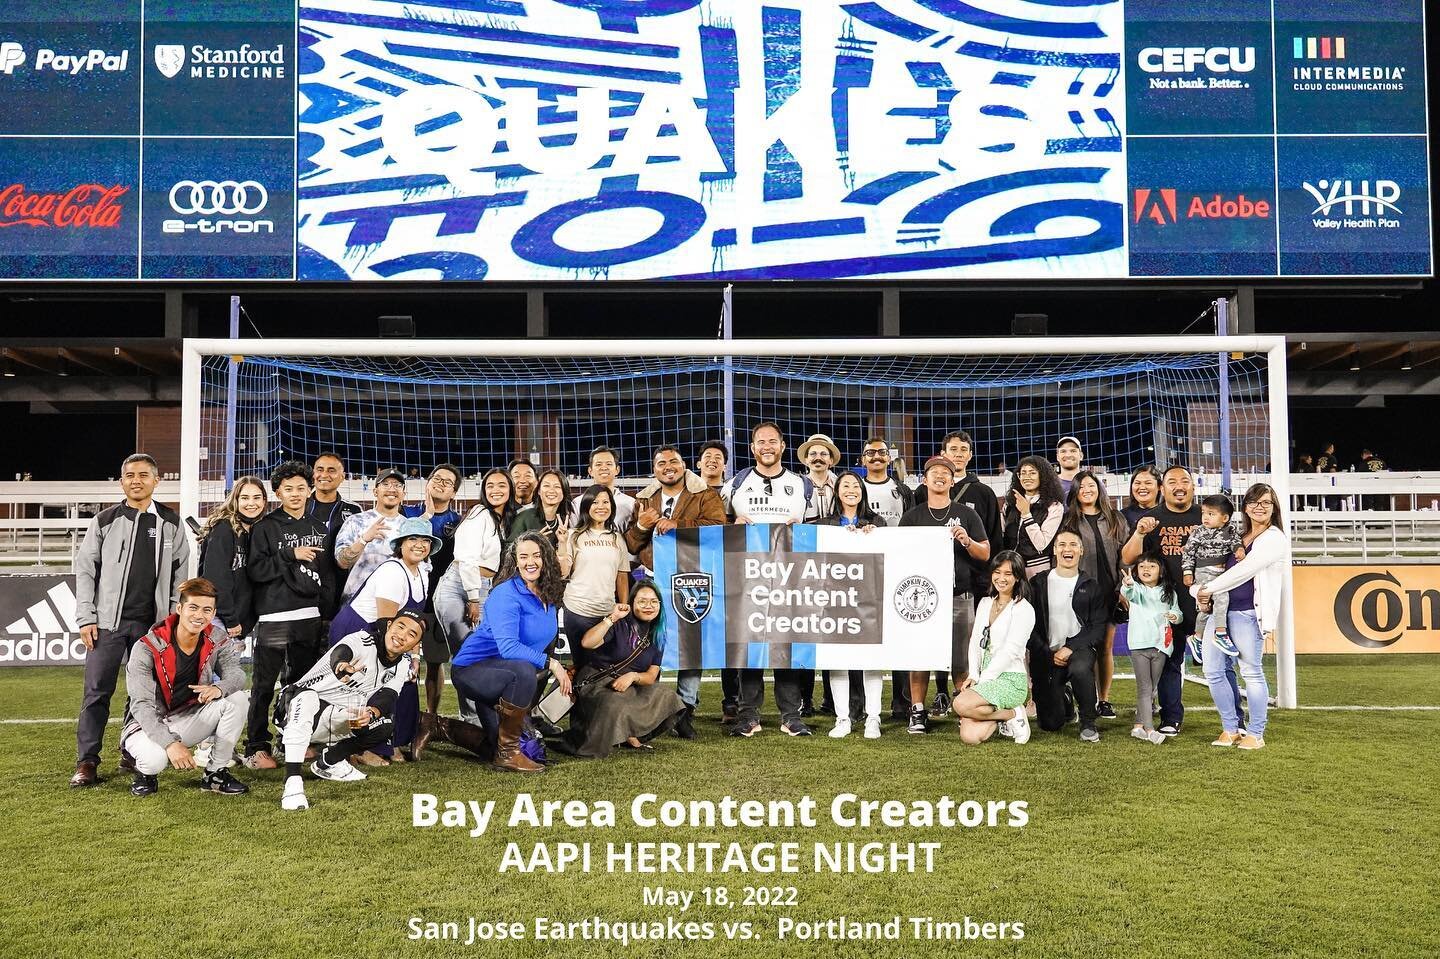 @bayareacontentcreators had a a great night out on the pitch supporting AAPI Heritage Night with the @sjearthquakes. 

#SjQuakesAAPI #Quakes74 #APIFamily #ContactCreator #Lawyer #Attorney #SanJose #BayArea